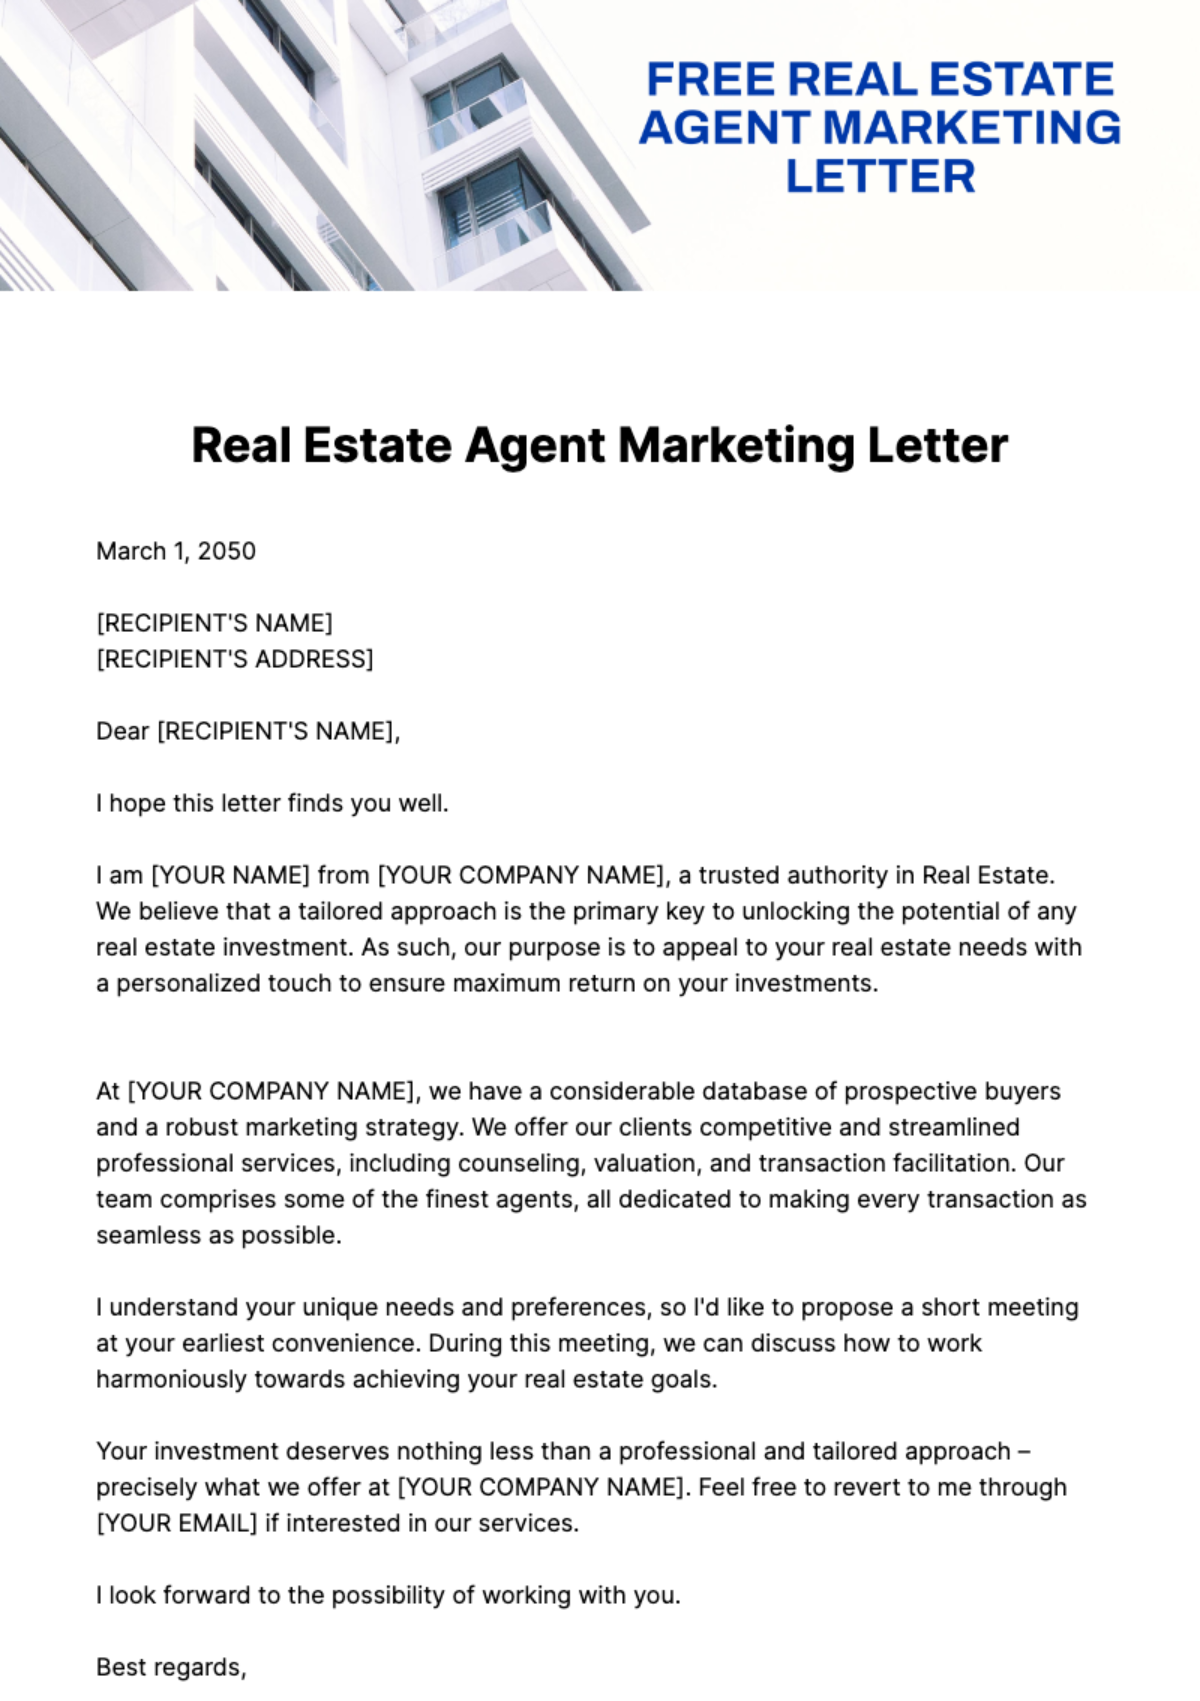 Free Real Estate Agent Marketing Letter Template